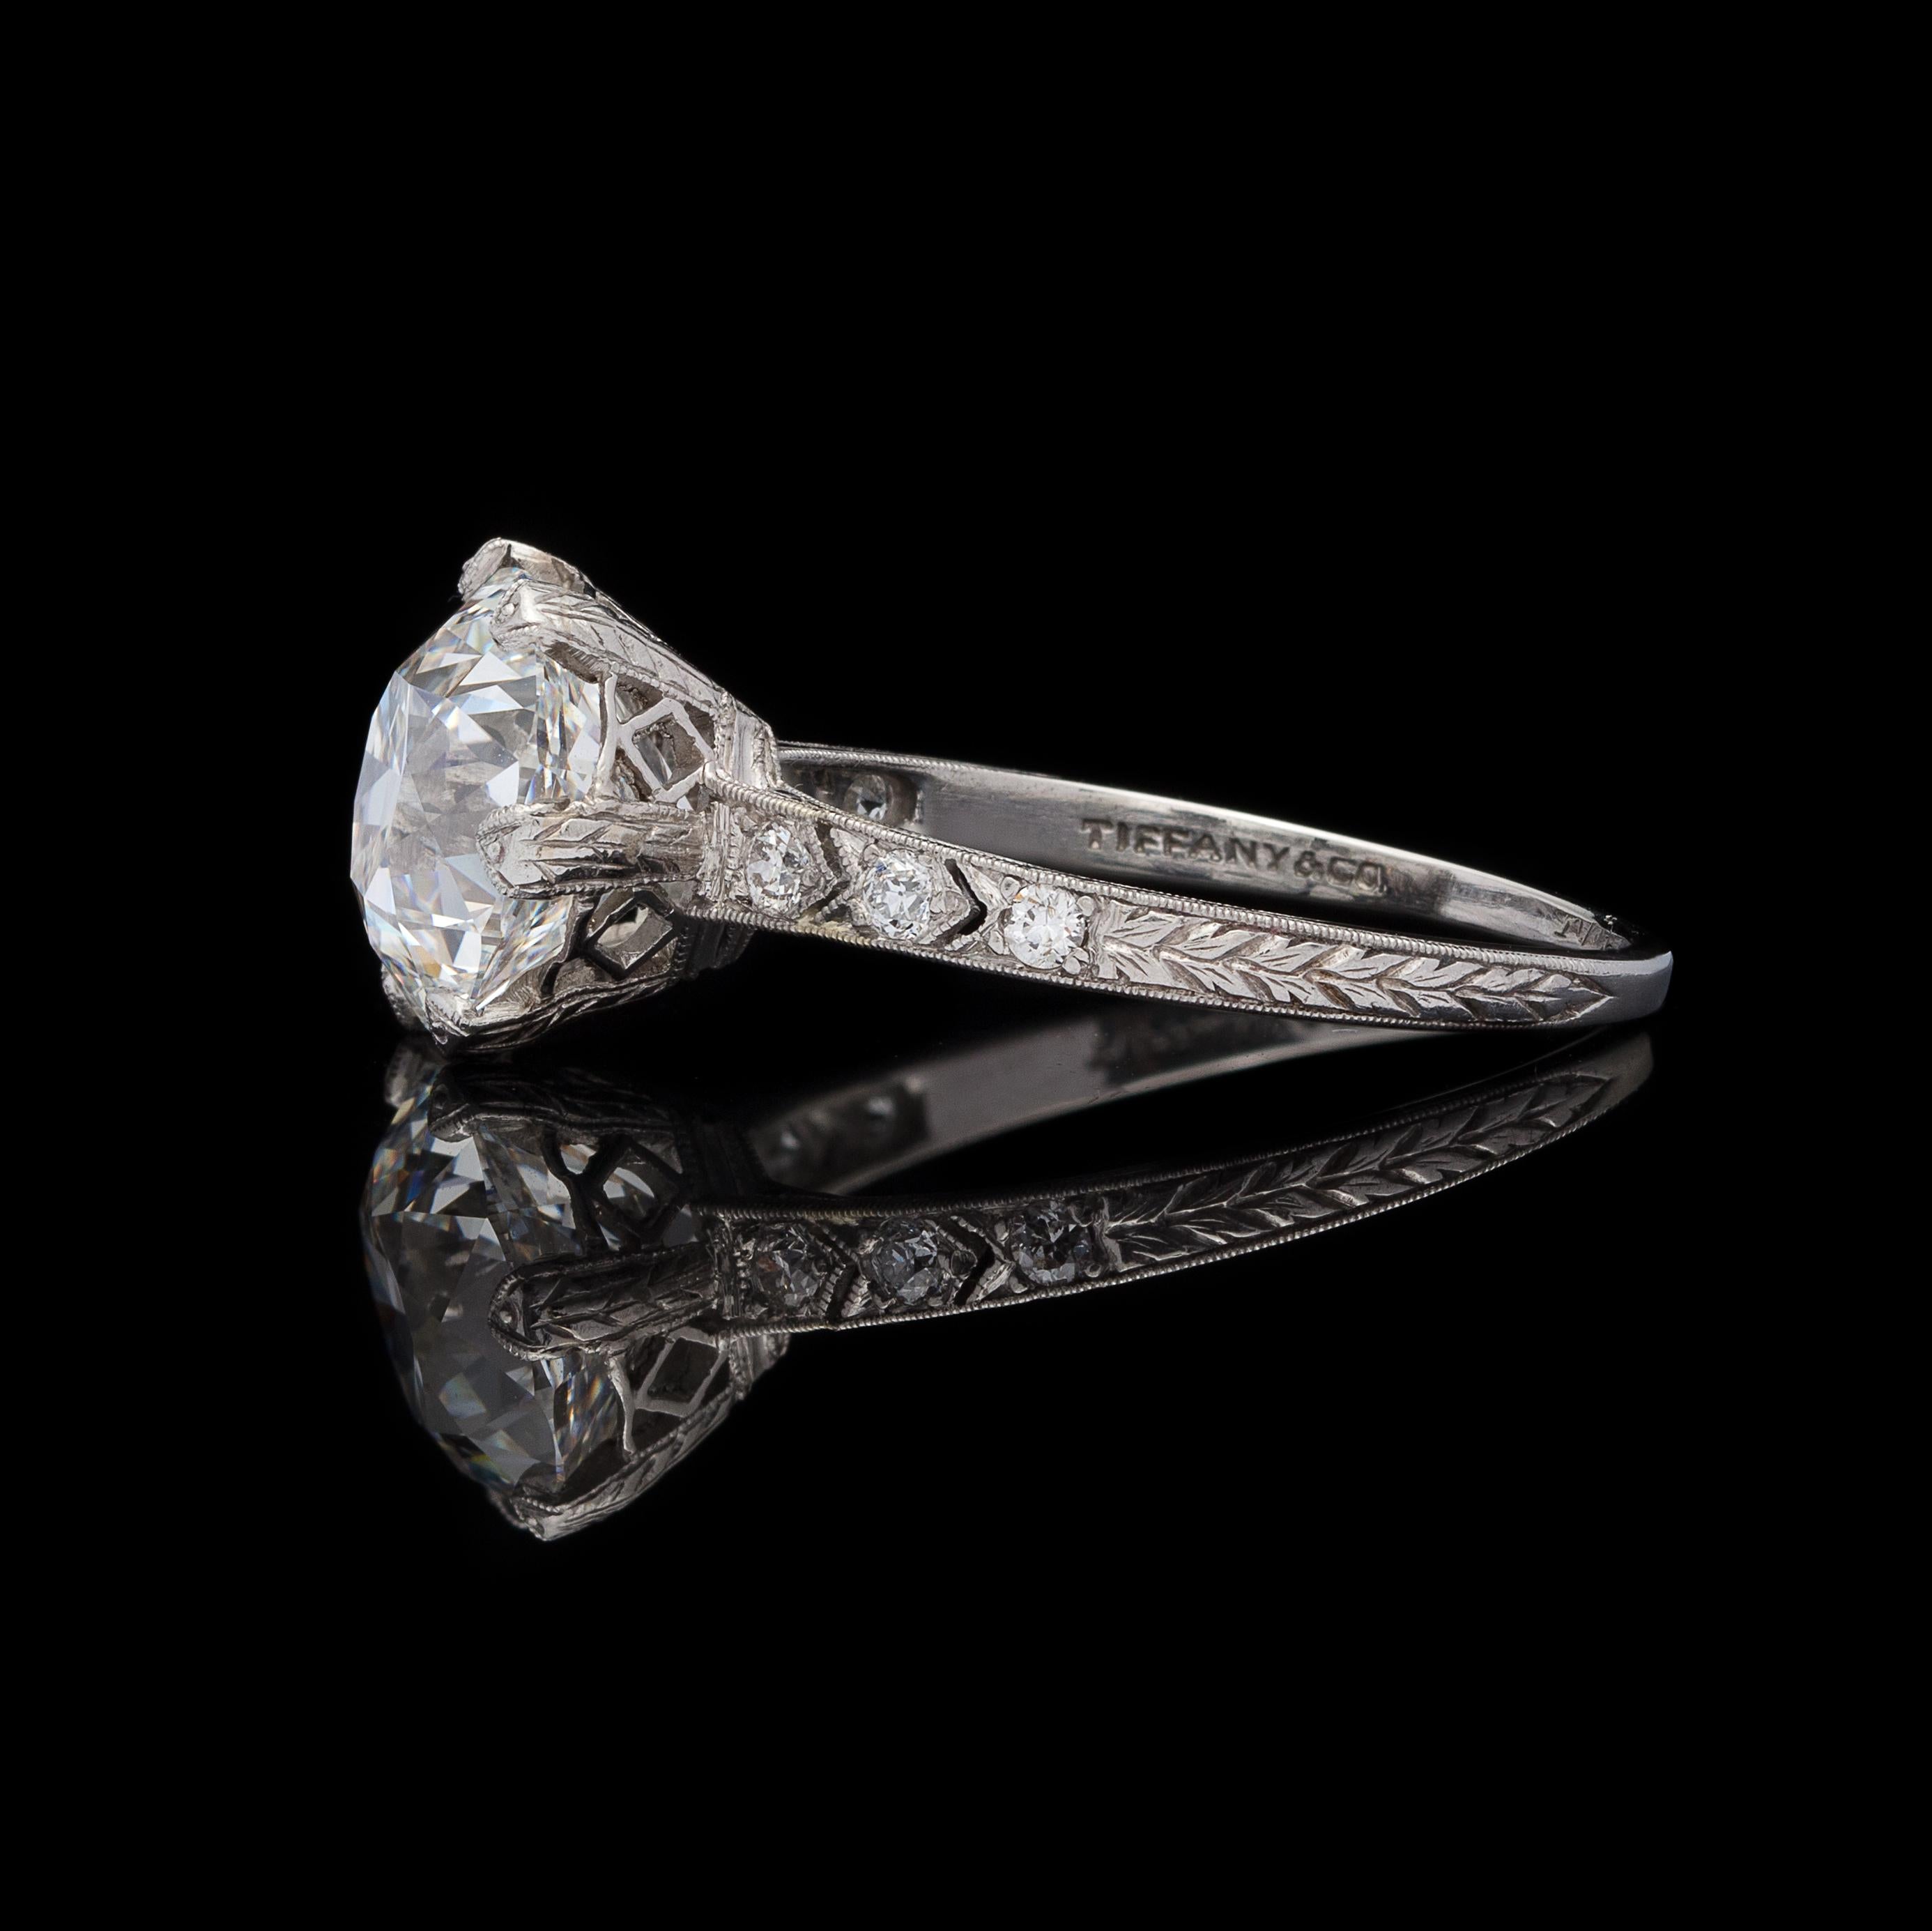 A gorgeous platinum ring, the GIA graded 3.11-cts F/VVS1 European-cut diamond is traffic stopping. Set in a glamorous, old world mounting signed Tiffany & Co.,  with open work and hand engraving, the shoulders set with 6 smaller European-cut